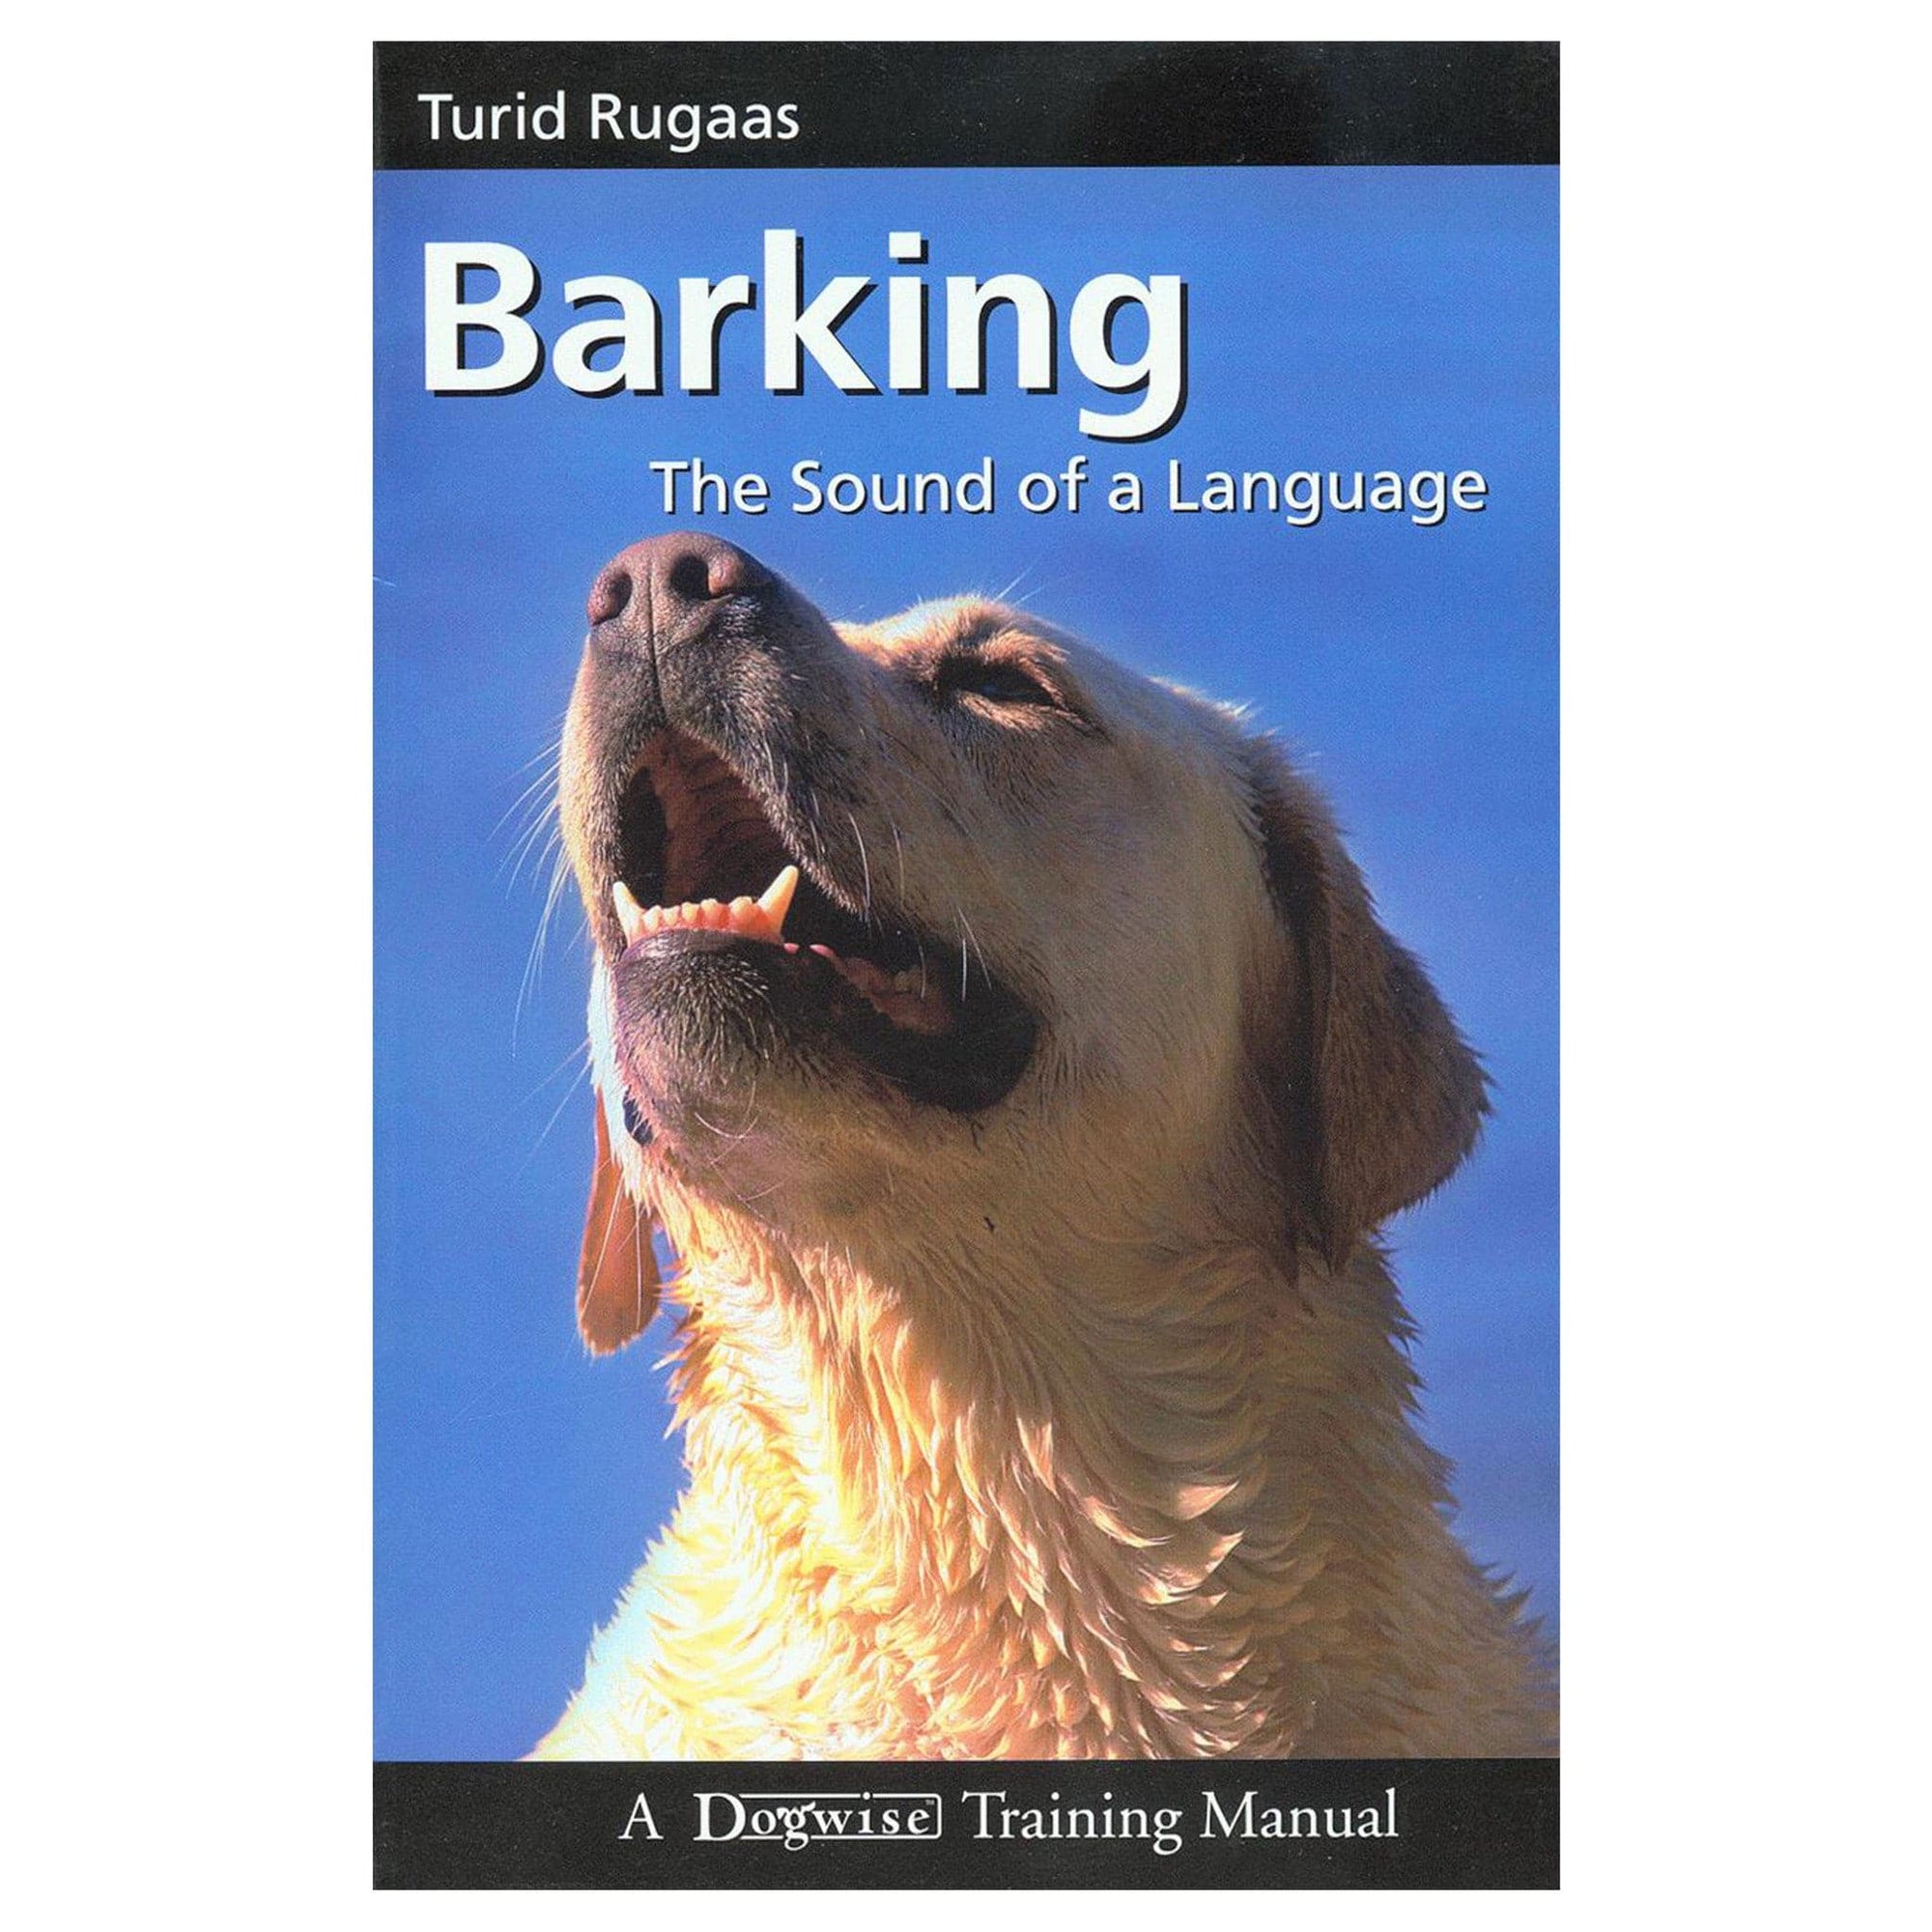 E-BOOK Barking: The Sound of Language by Turid Rugaas